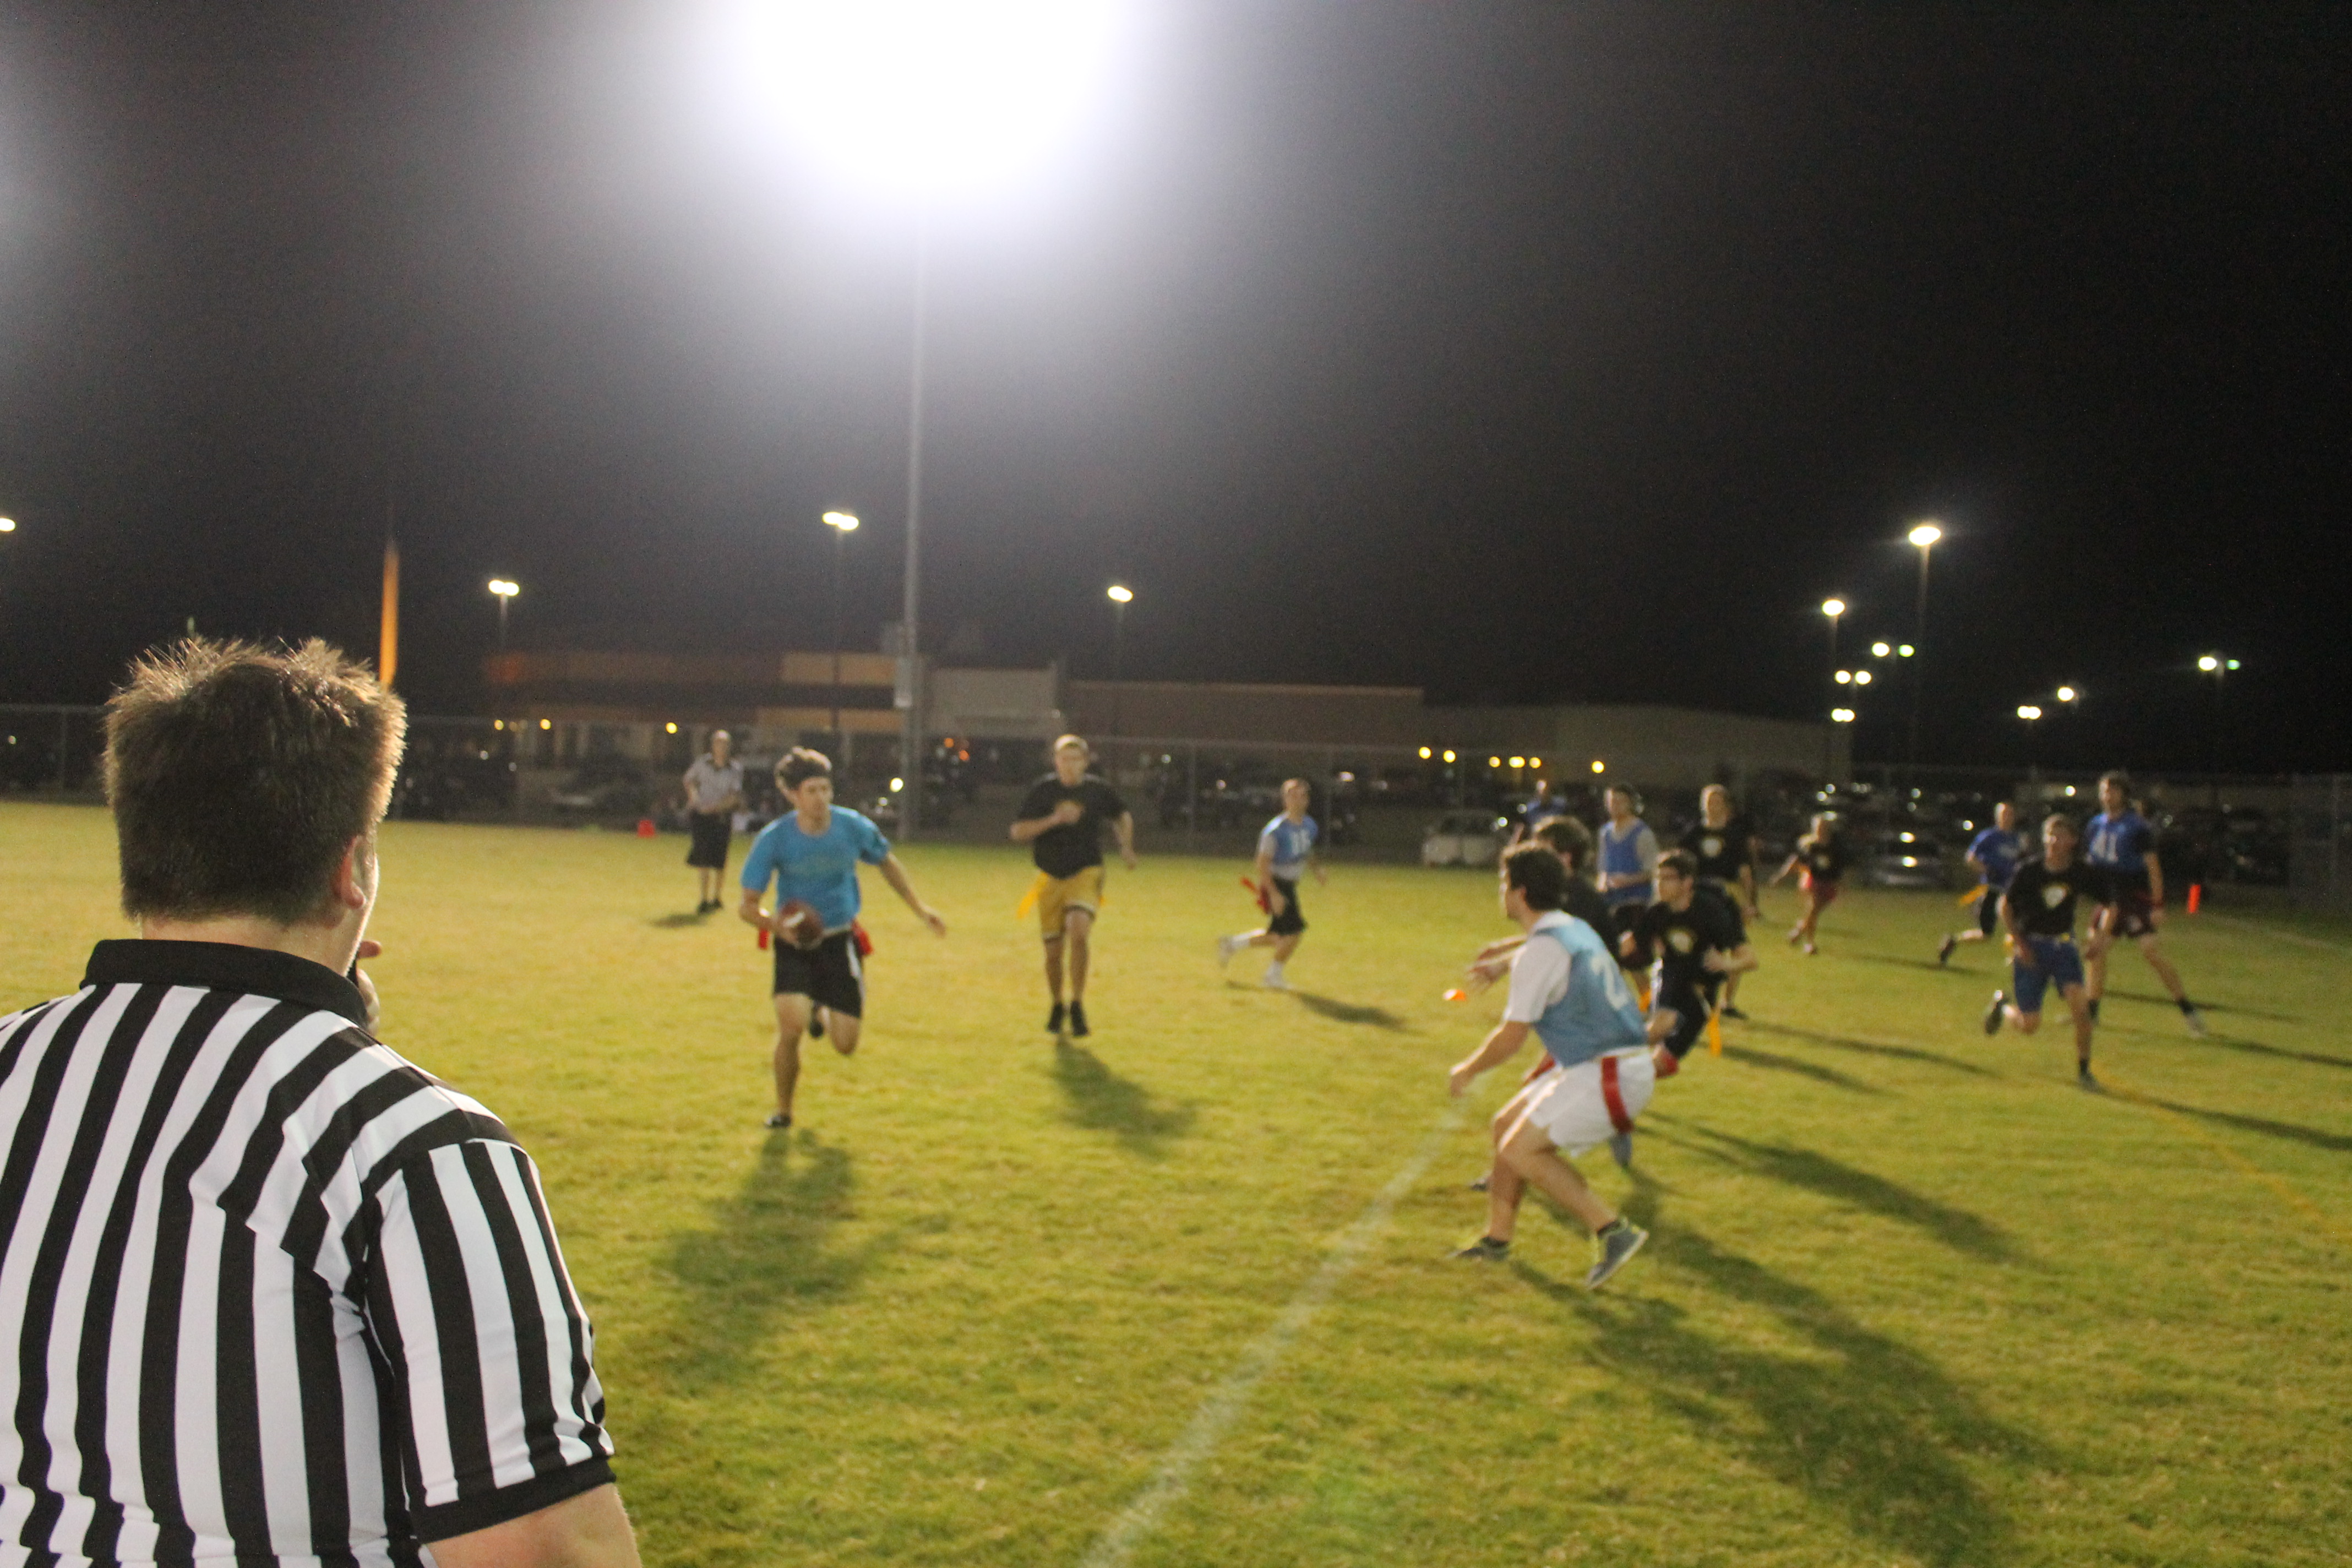 people playing flag football. camera is focused on the ref in the bottom left corner, who is facing away from us and toward the players.